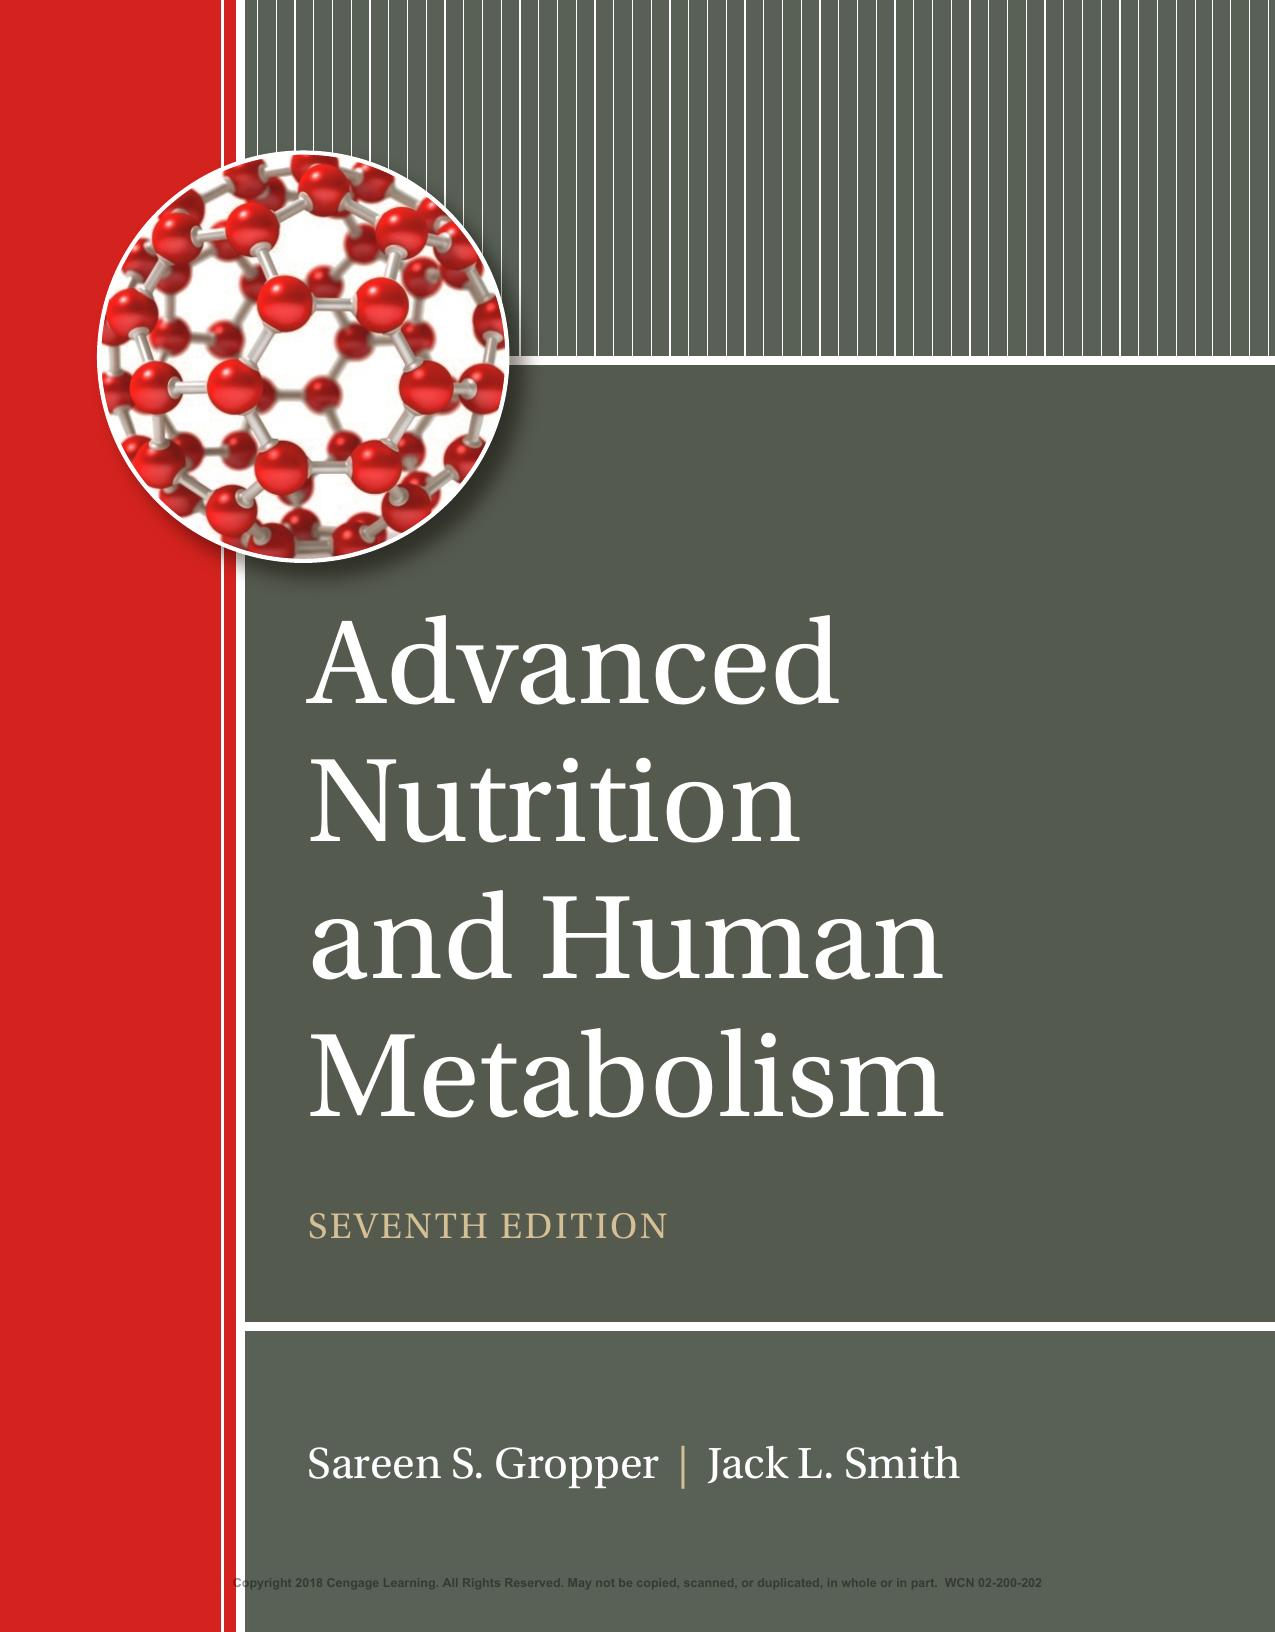 (Test Bank)Advanced Nutrition and Human Metabolism 7th Edition by Sareen Gropper